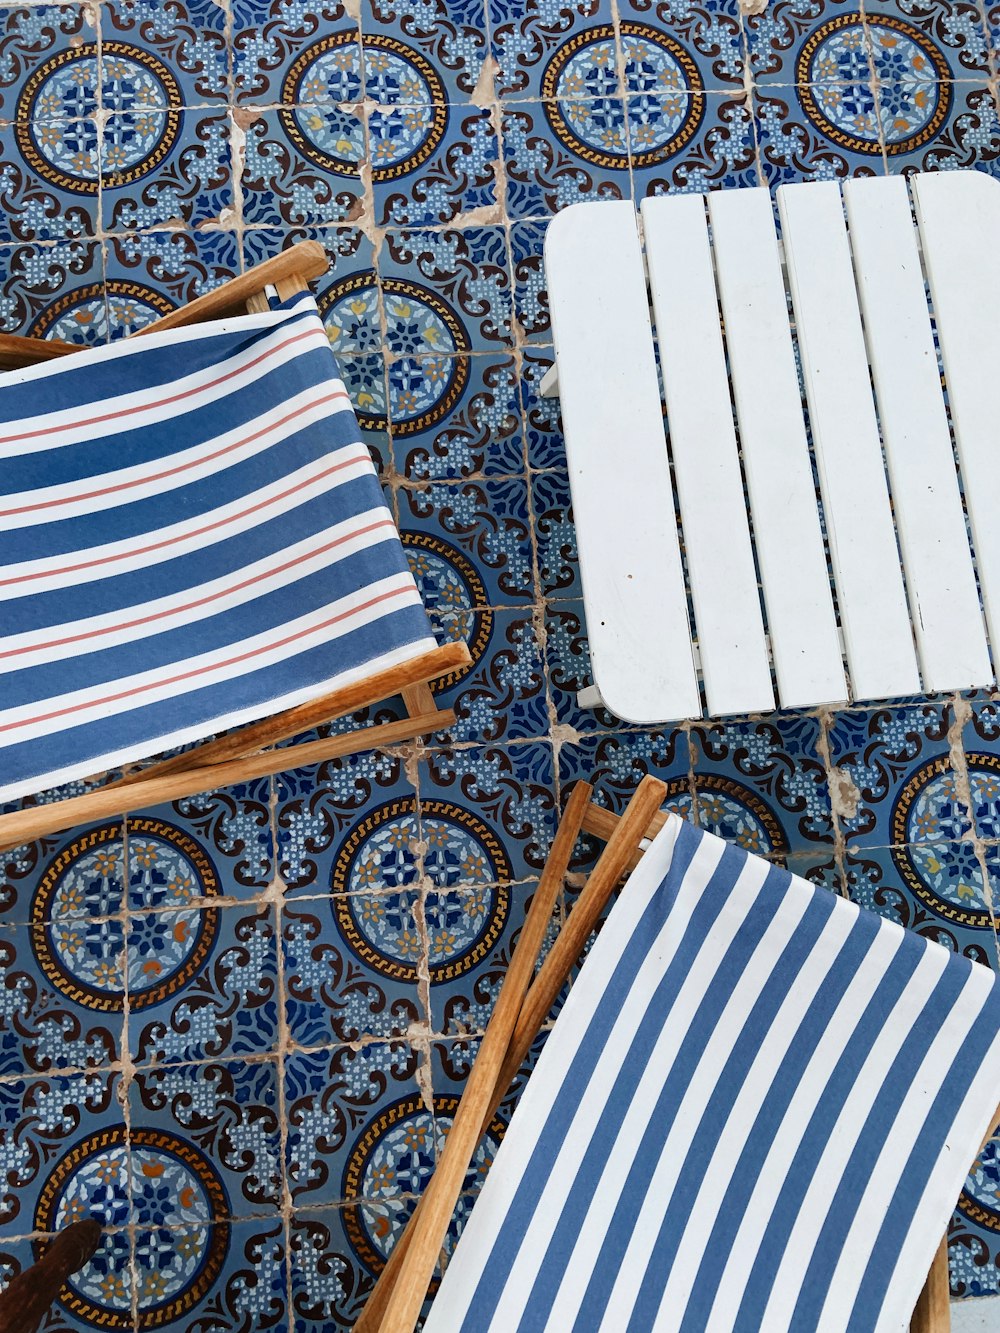 white and blue striped folding chair